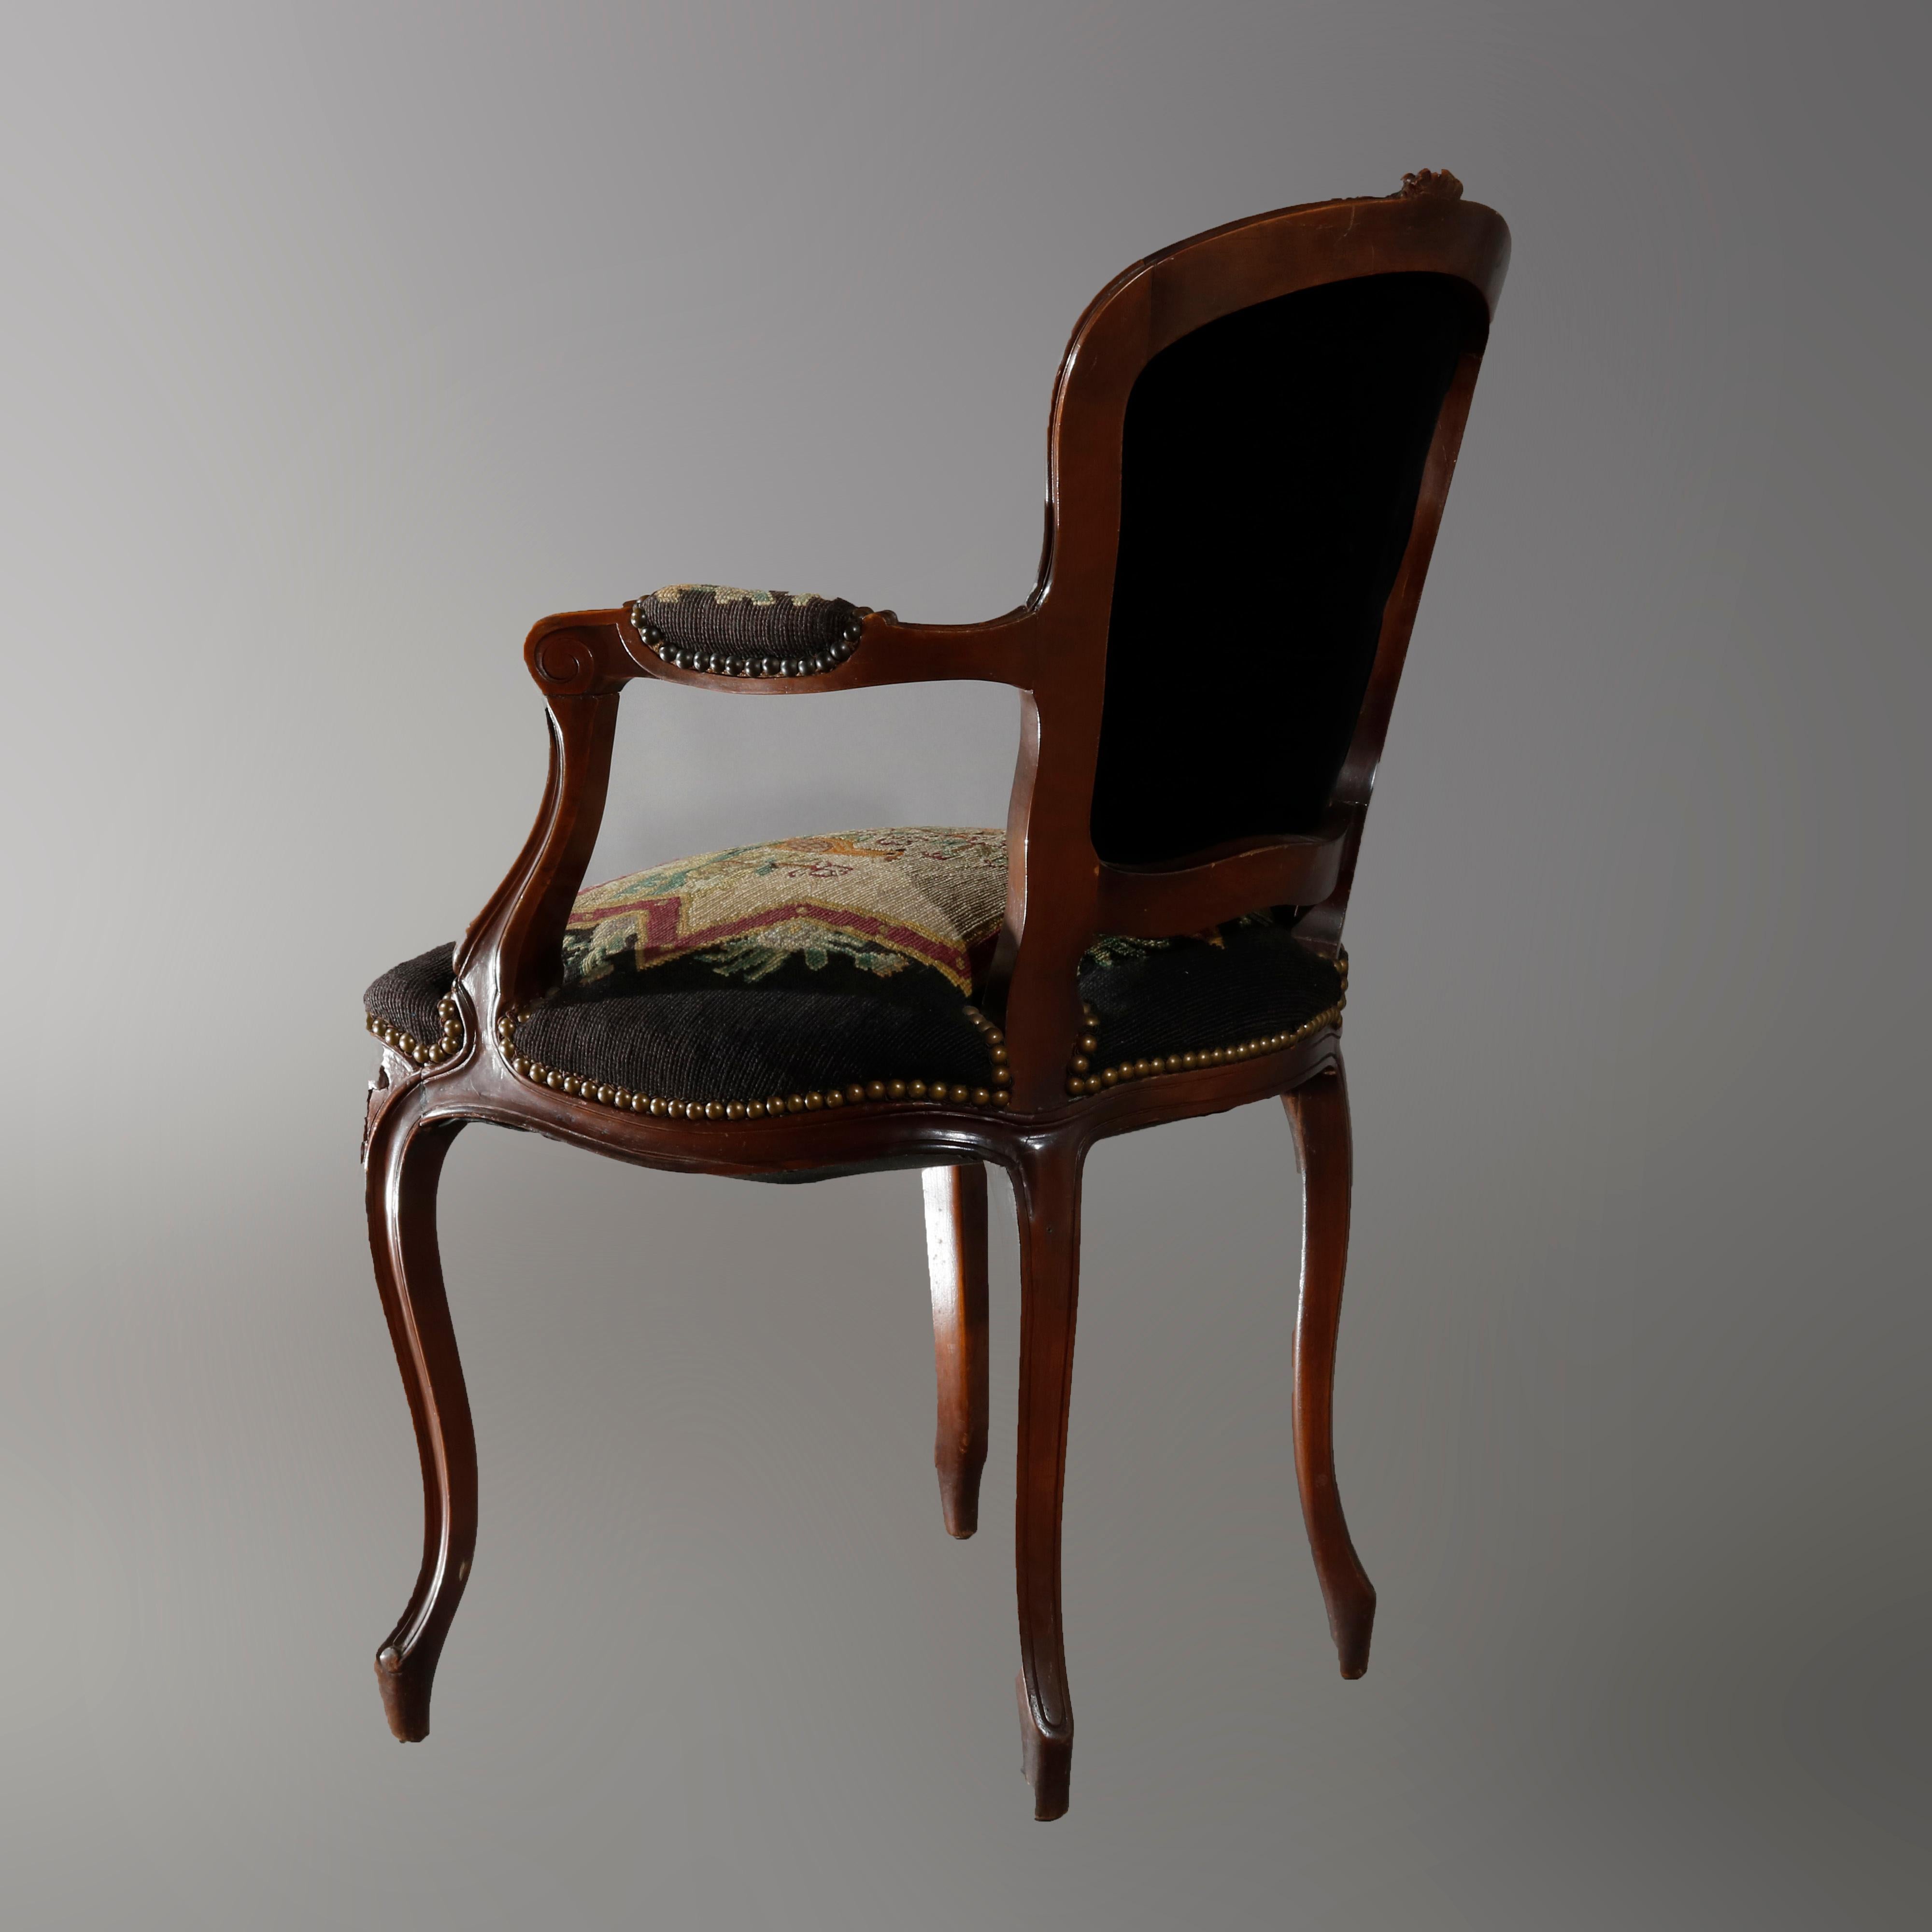 An antique French Louis XIV fauteuil armchair offers walnut frame with foliate carved crest over needlepoint tapestry upholstered back, seat and arms having garden scenes including man and birds, raised on cabriole legs, circa 1920

Measures: